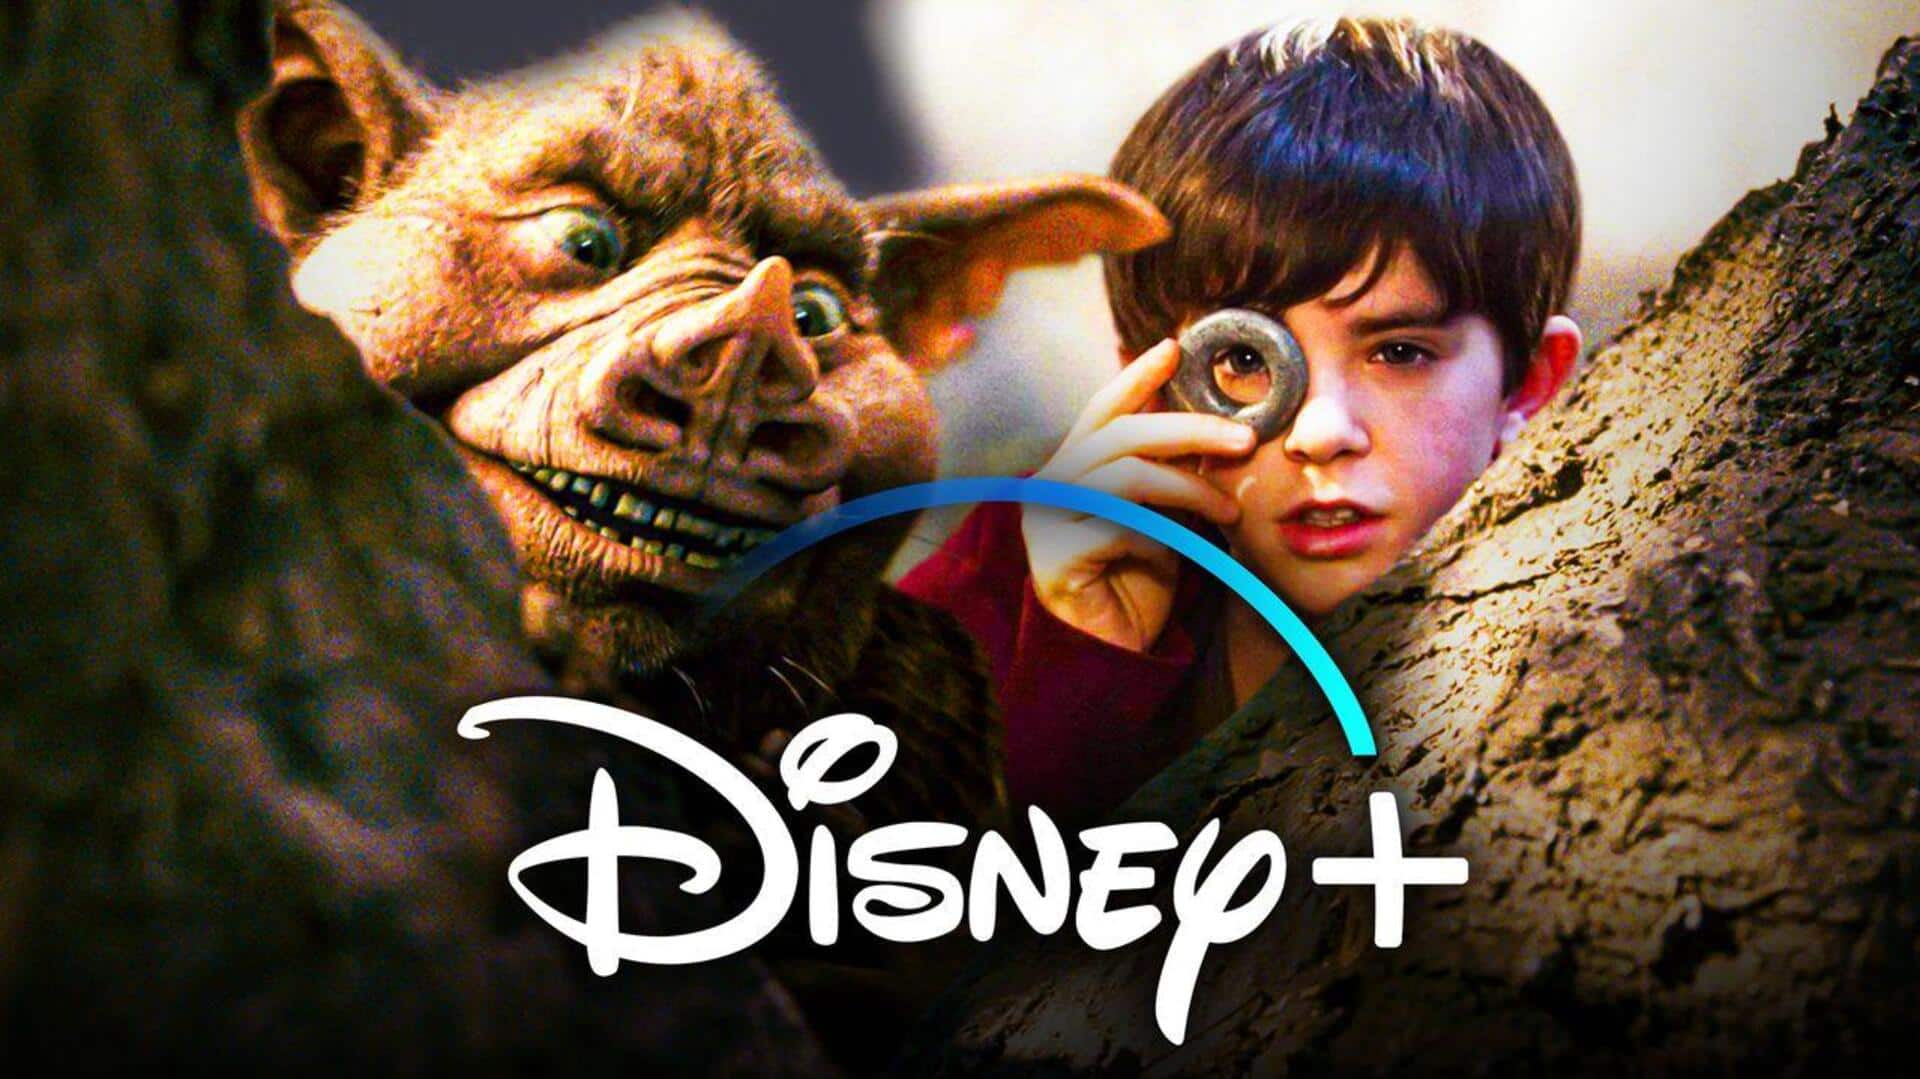 Disney+ drops 'Spiderwick Chronicles' adaptation; exploring streamer's content cost-cutting policy